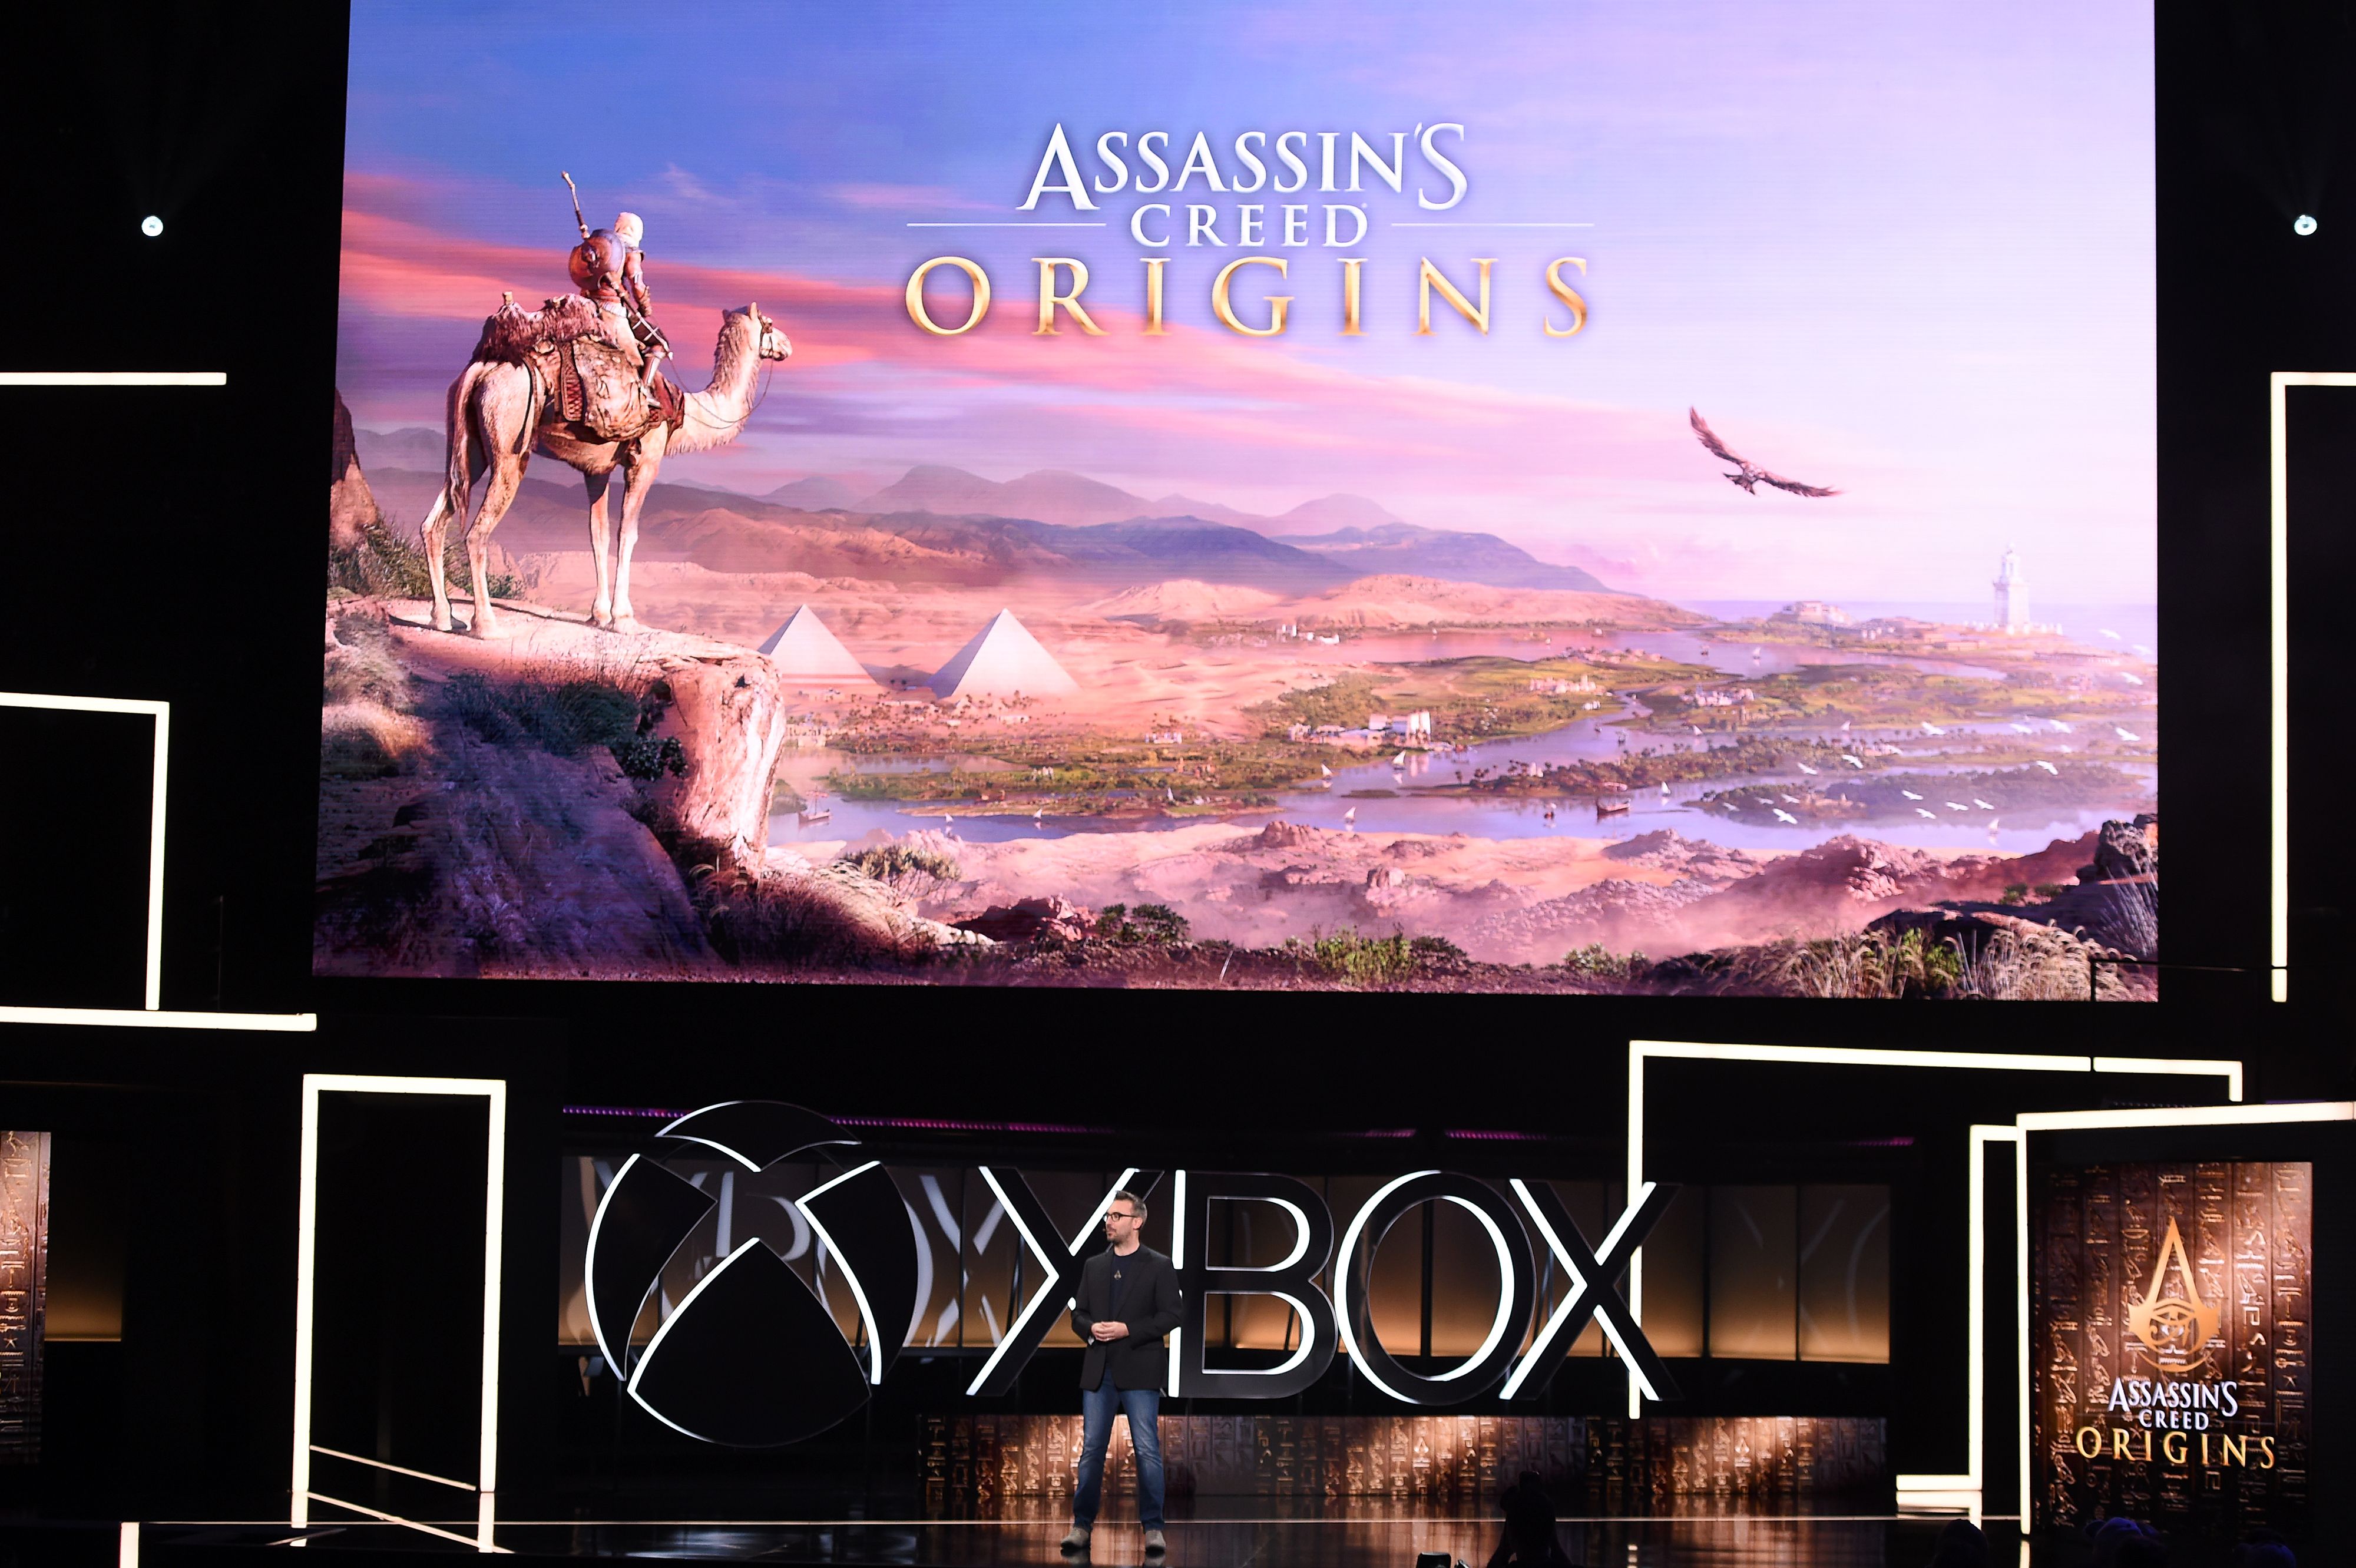 Jean Guesdon introduces Assassin's Creed Origins at the Microsoft Xbox E3 2017 Briefing, June 11, 2017 at the Galen Center in Los Angeles, California. 
                      The Electronic Entertainment Expo (E3), which focuses on new products and technologies in electronic gaming systems and interactive entertainment, takes places June 13-15 at the Los Angeles Convention Center. / AFP PHOTO / Robyn BECK        (Photo credit should read ROBYN BECK/AFP/Getty Images) (ROBYN BECK&mdash;AFP/Getty Images)